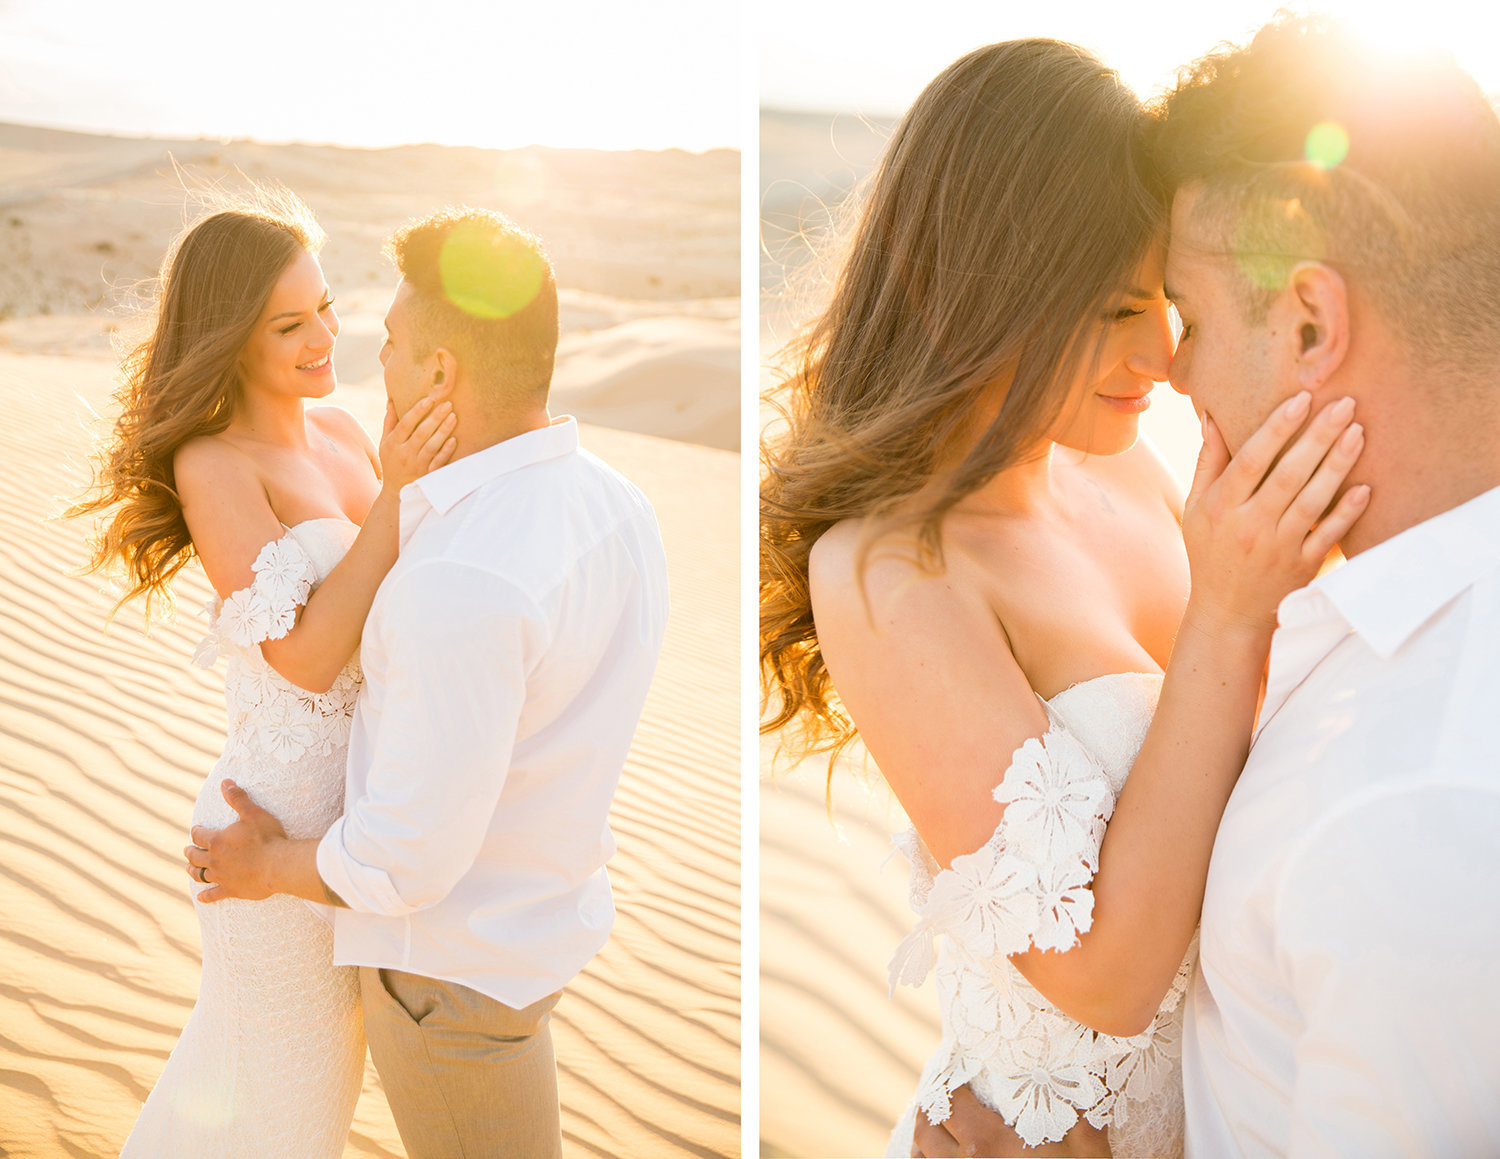 Bride and Groom Embracing During Sunset at Glamis Sand Dunes